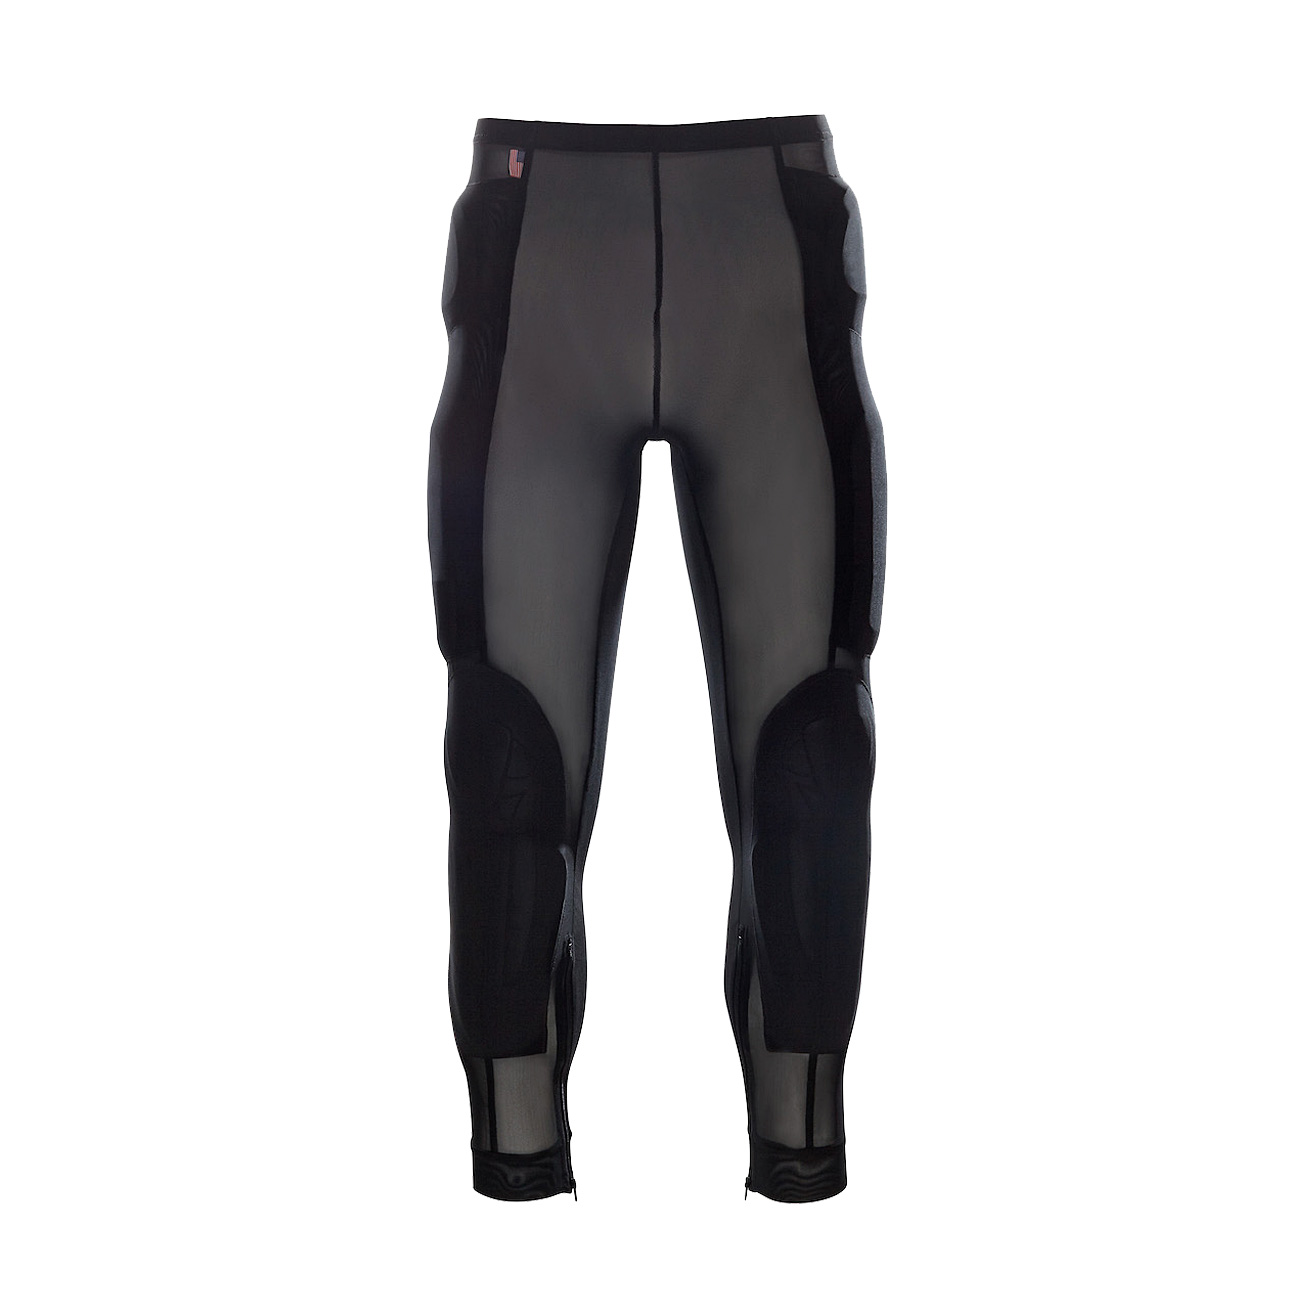 Armored Motorcycle Riding Pants | Hot + 